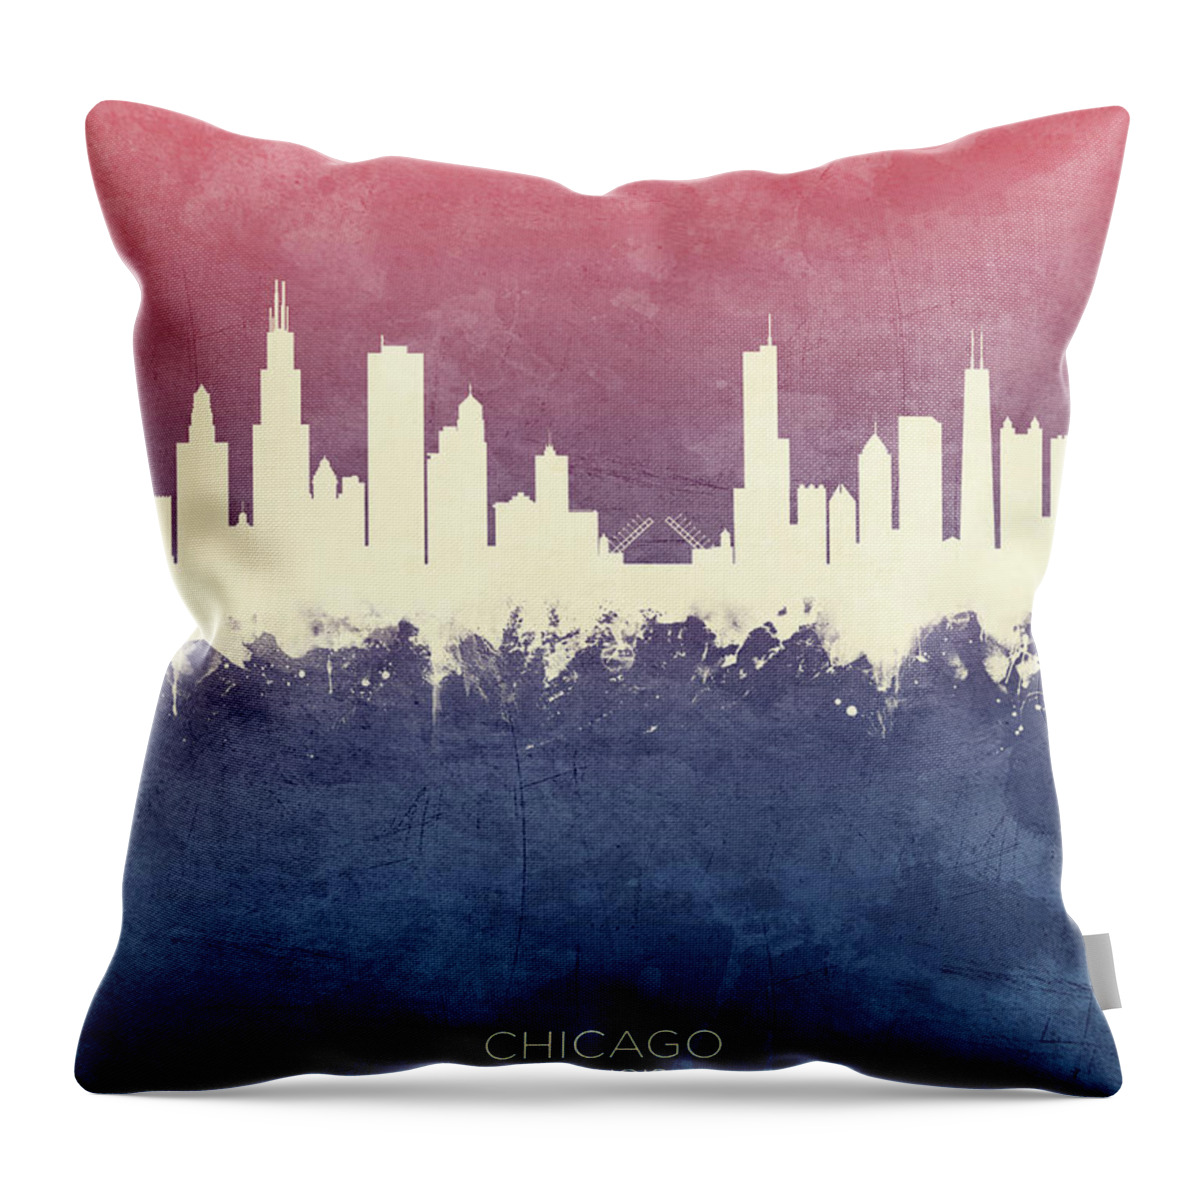 Chicago Throw Pillow featuring the digital art Chicago Illinois Skyline by Michael Tompsett